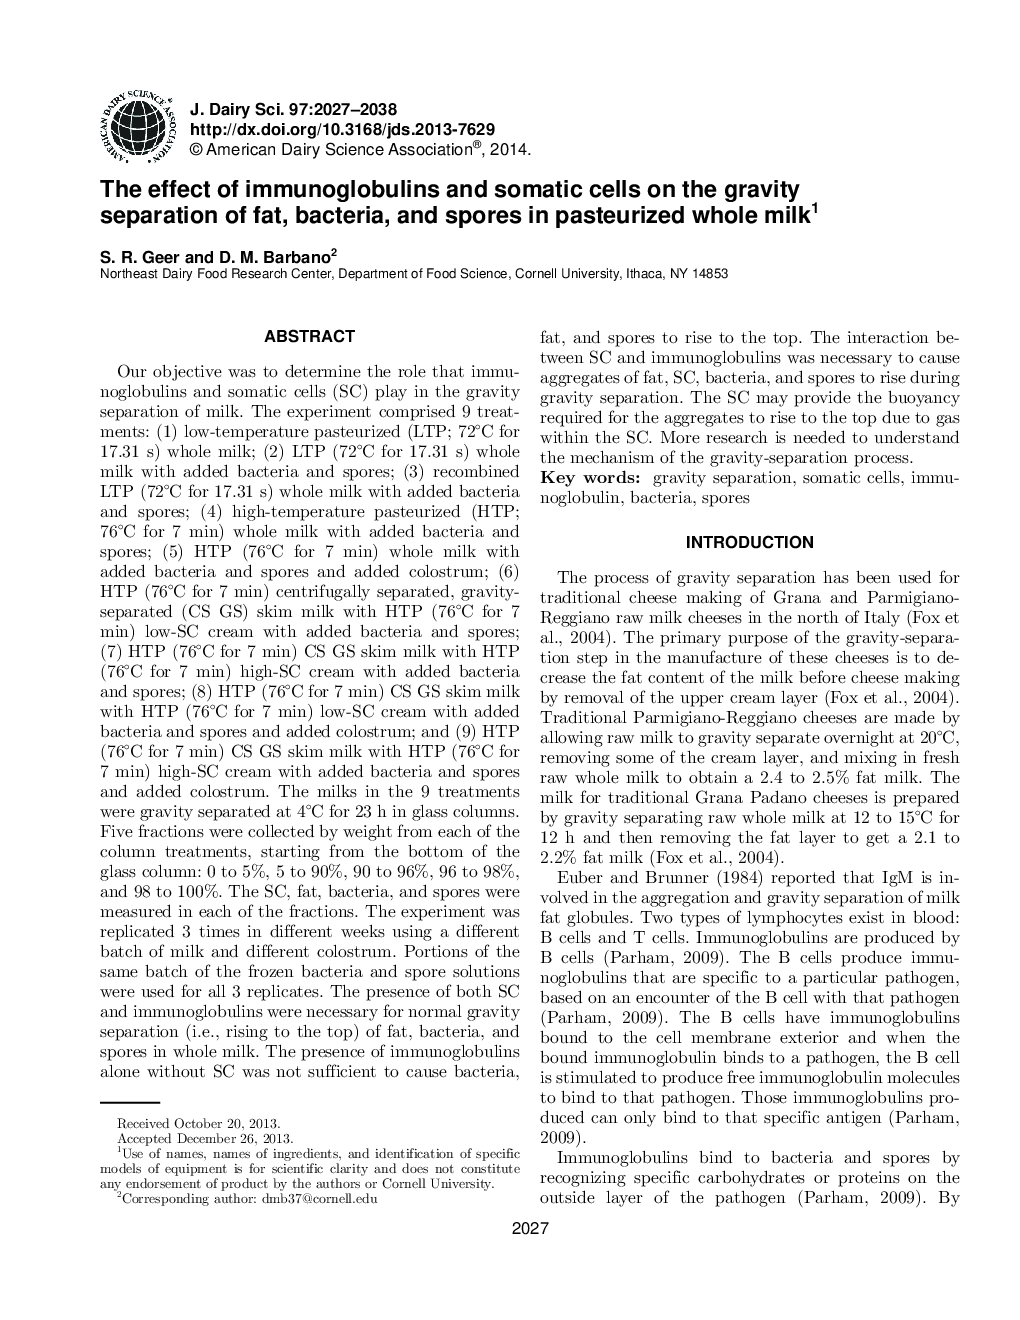 The effect of immunoglobulins and somatic cells on the gravity separation of fat, bacteria, and spores in pasteurized whole milk1